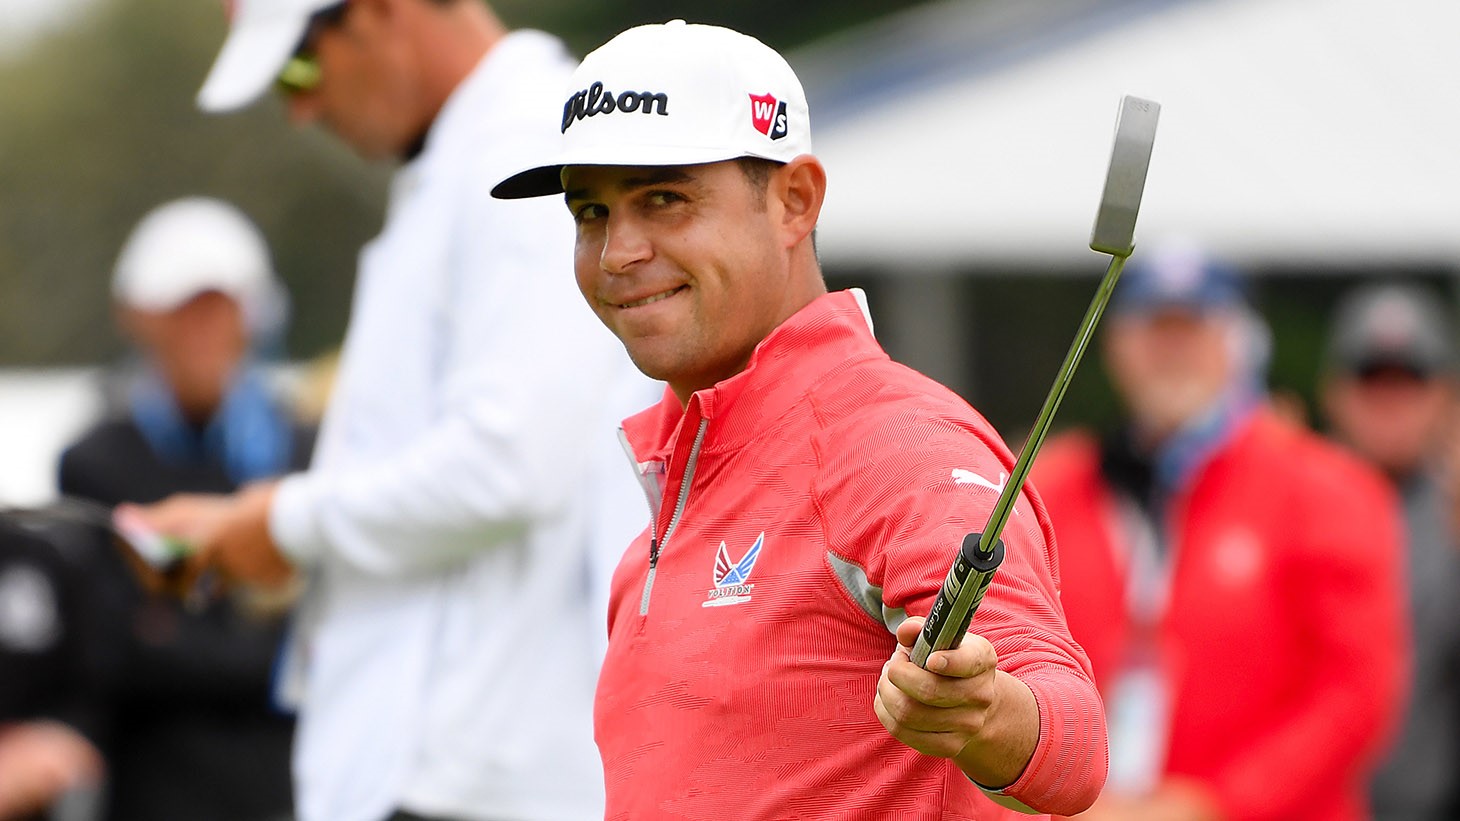 Gary Woodland captured the 2019 U.S. Open soon after switching to the Titleist Pro V1 golf ball.